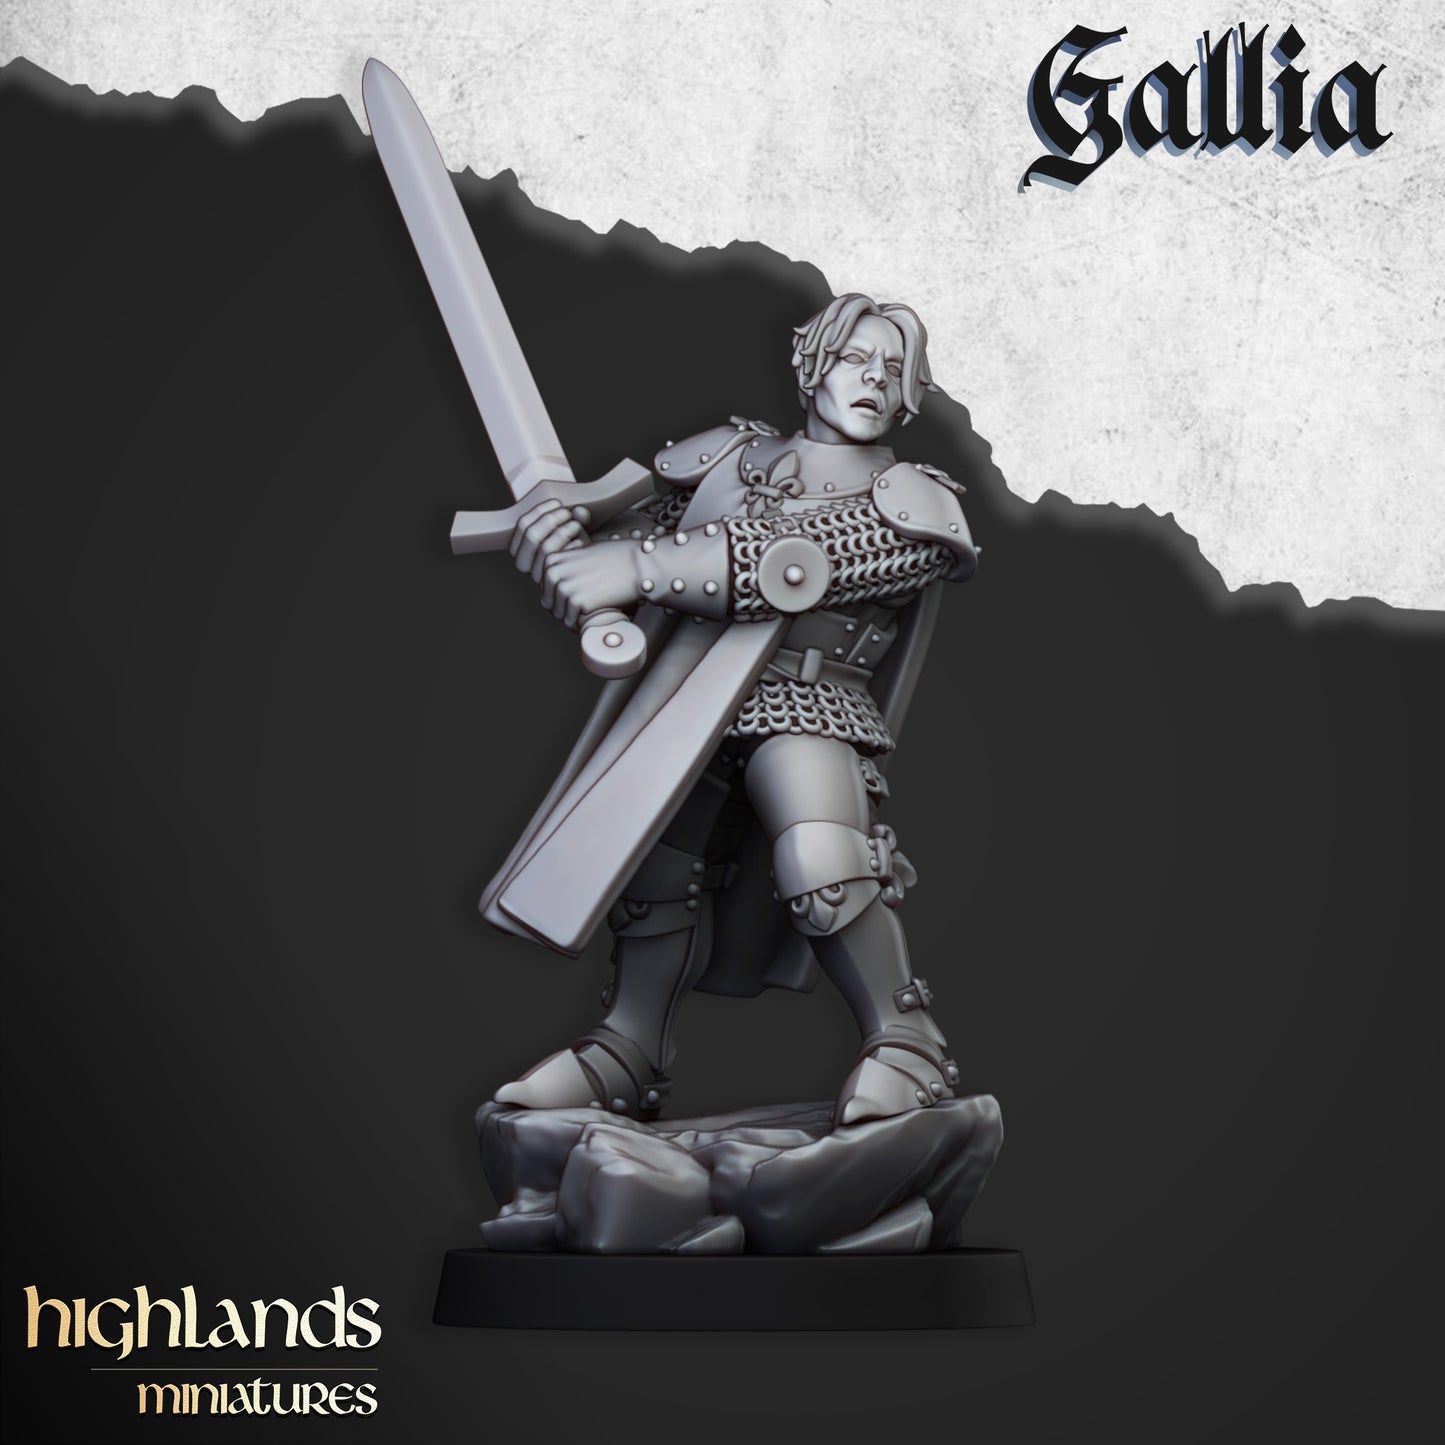 Baroness of Gallia from Highlands Miniatures